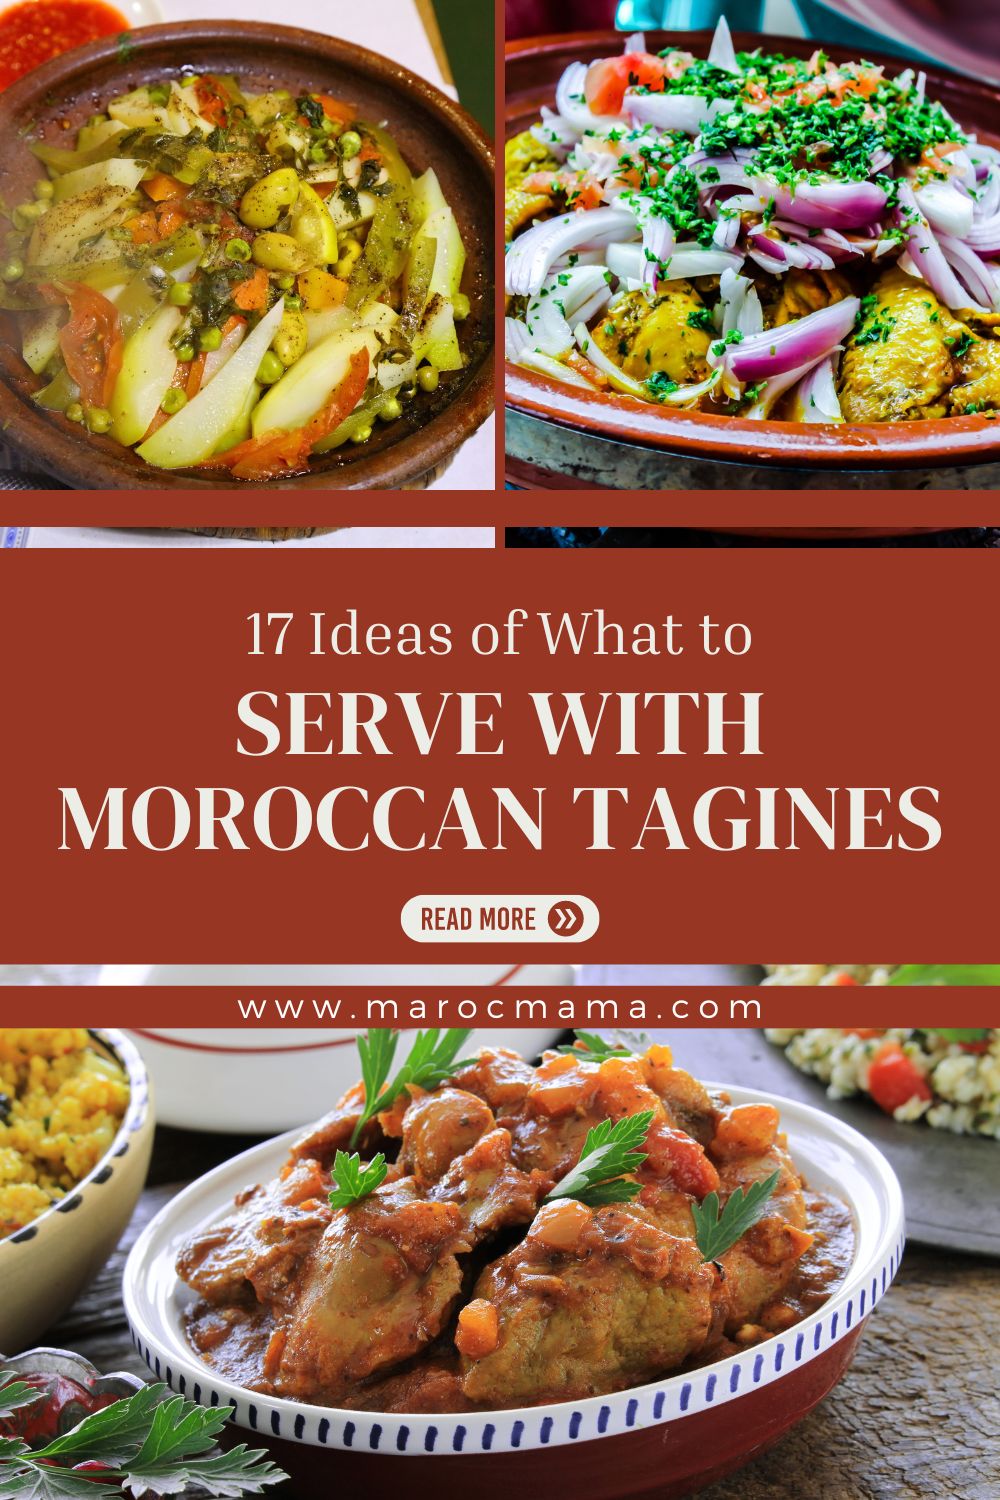 Moroccan tagine with chicken and onions, vegetable and lamb tagine dishes with the text 17 Ideas of What to Serve with Moroccan Tagines